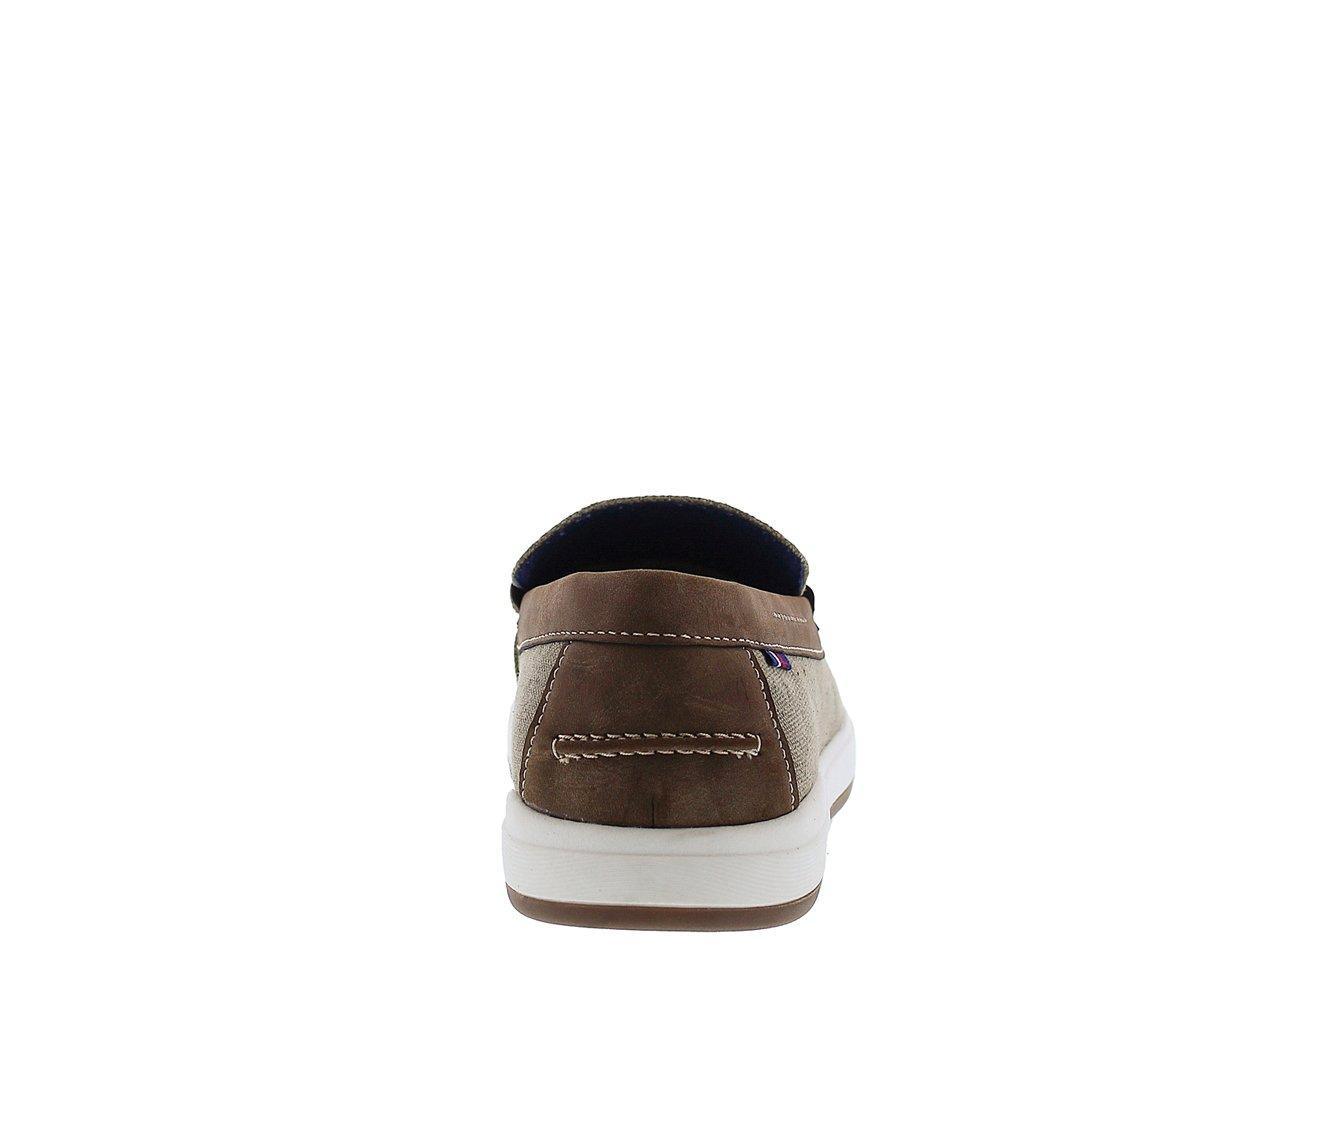 Men's English Laundry Russell Loafers